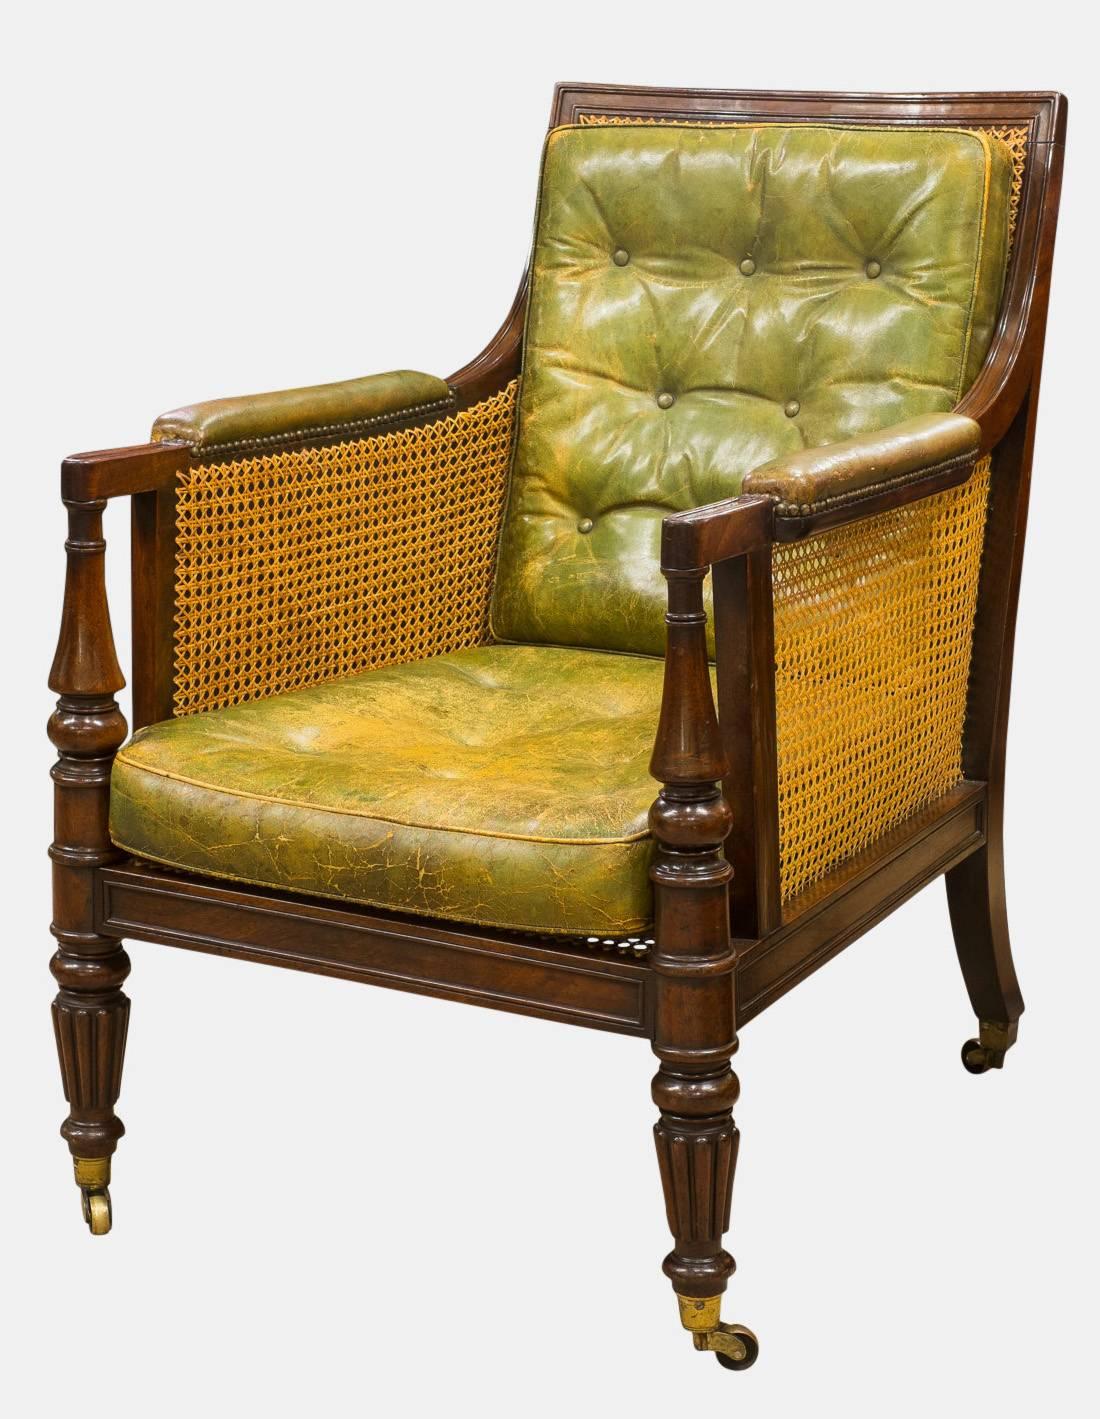 A superb Regency mahogany library Bergère chair, attributed to Gillows. With paneled, beaded framework, reeded front legs and original castors stamped B.S & P. Patent, chair maker stamp M.B., circa 1815.  